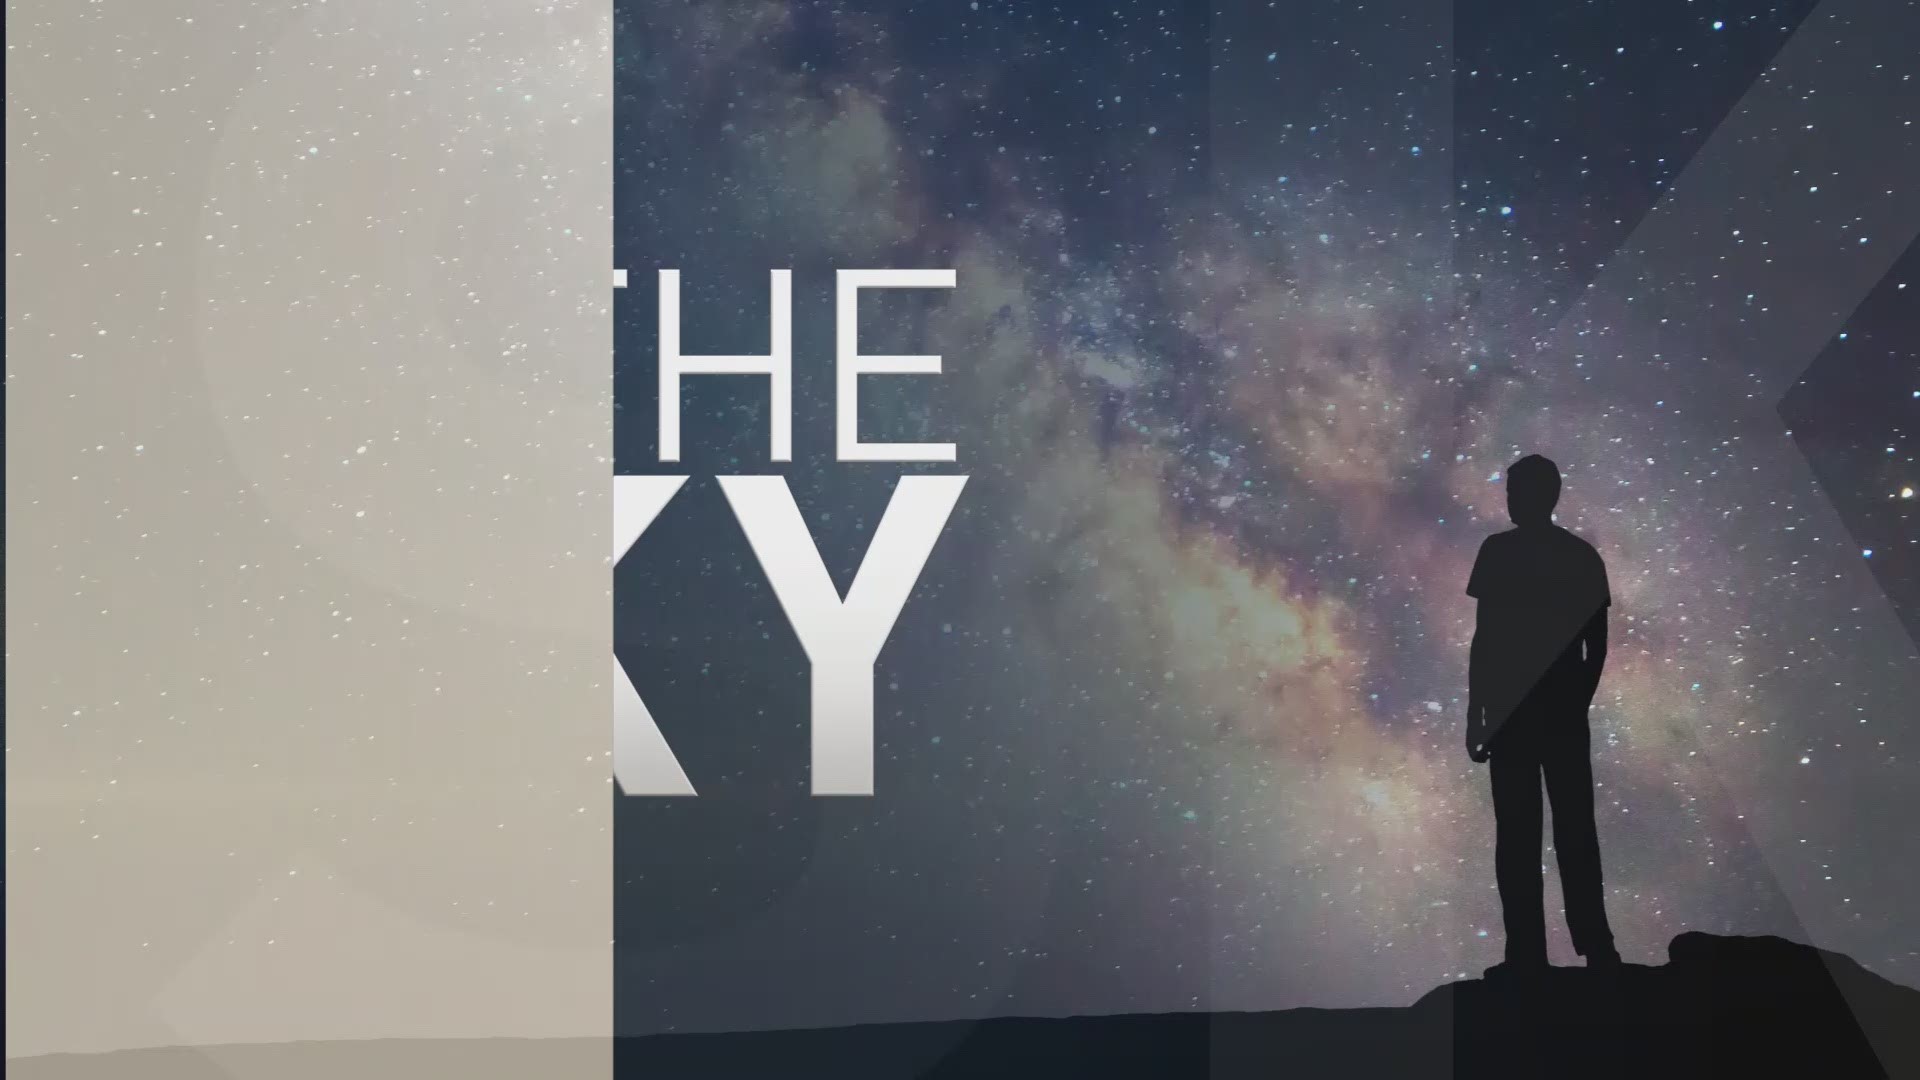 WATCH | Our moon and Mercury are hot topics in this edition of "In the Sky" with Jay Reynolds and Gale Franko. #3astronomy